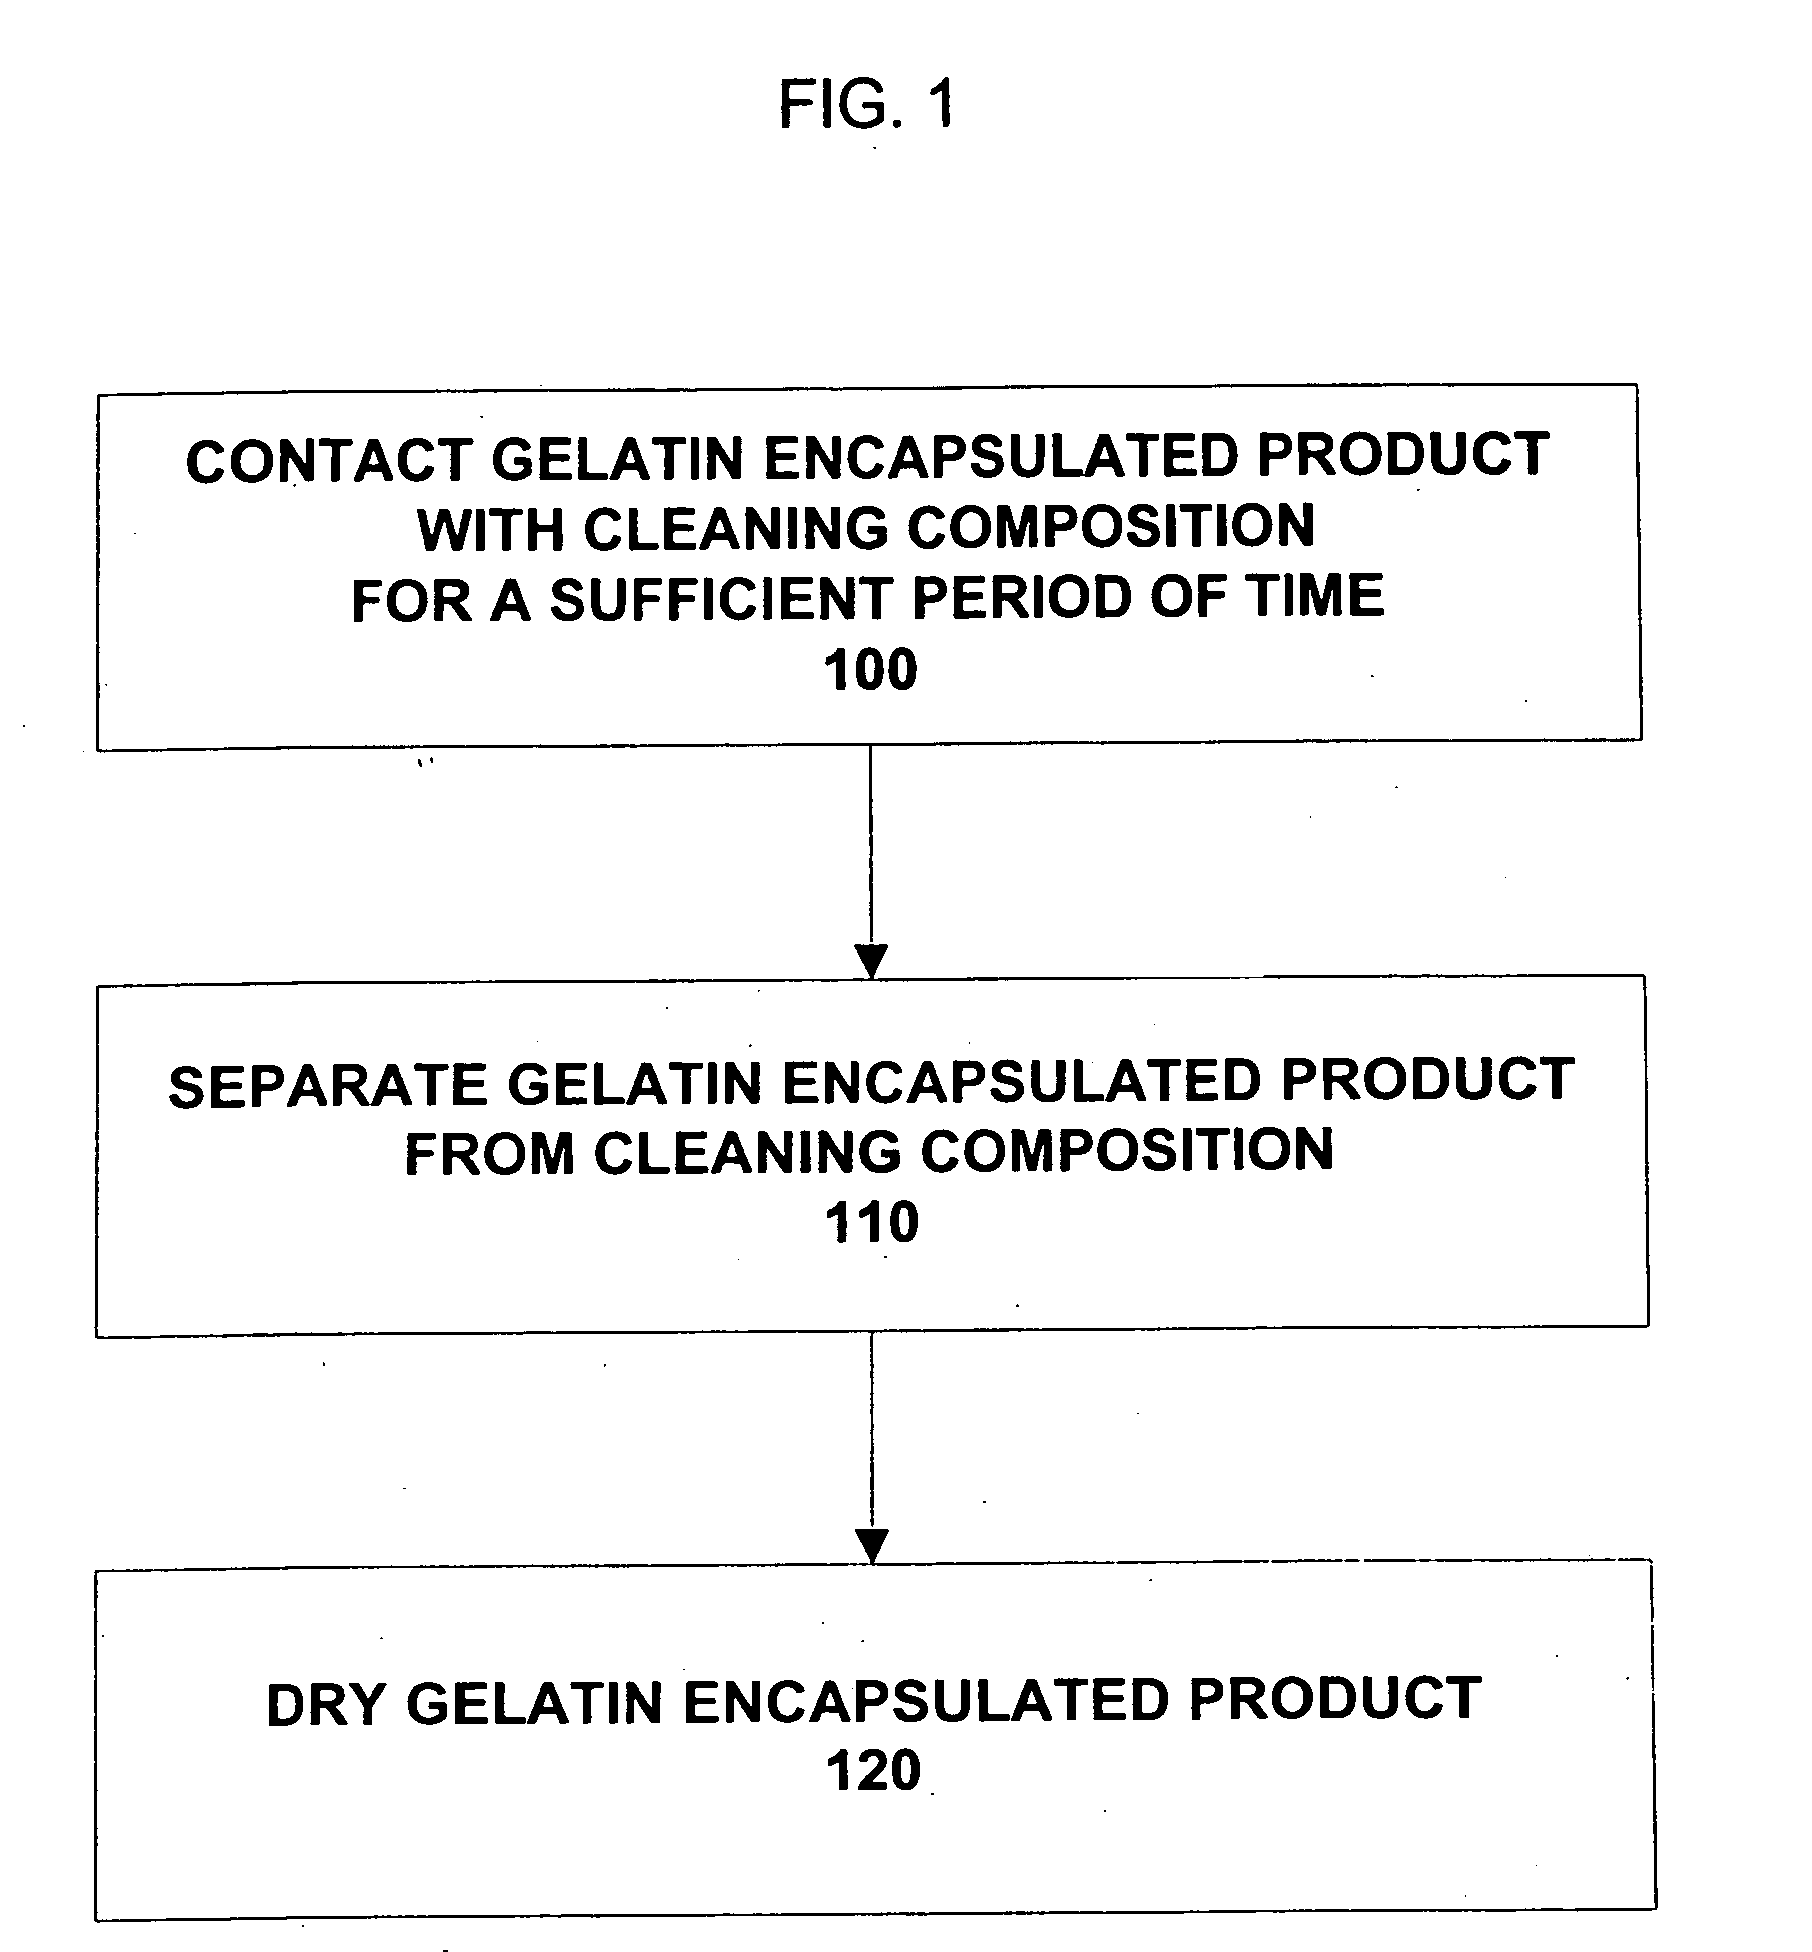 Composition and method for cleaning gelatin encapsulated products comprising comprising a non-volatile silicone/volatile silicone mixture